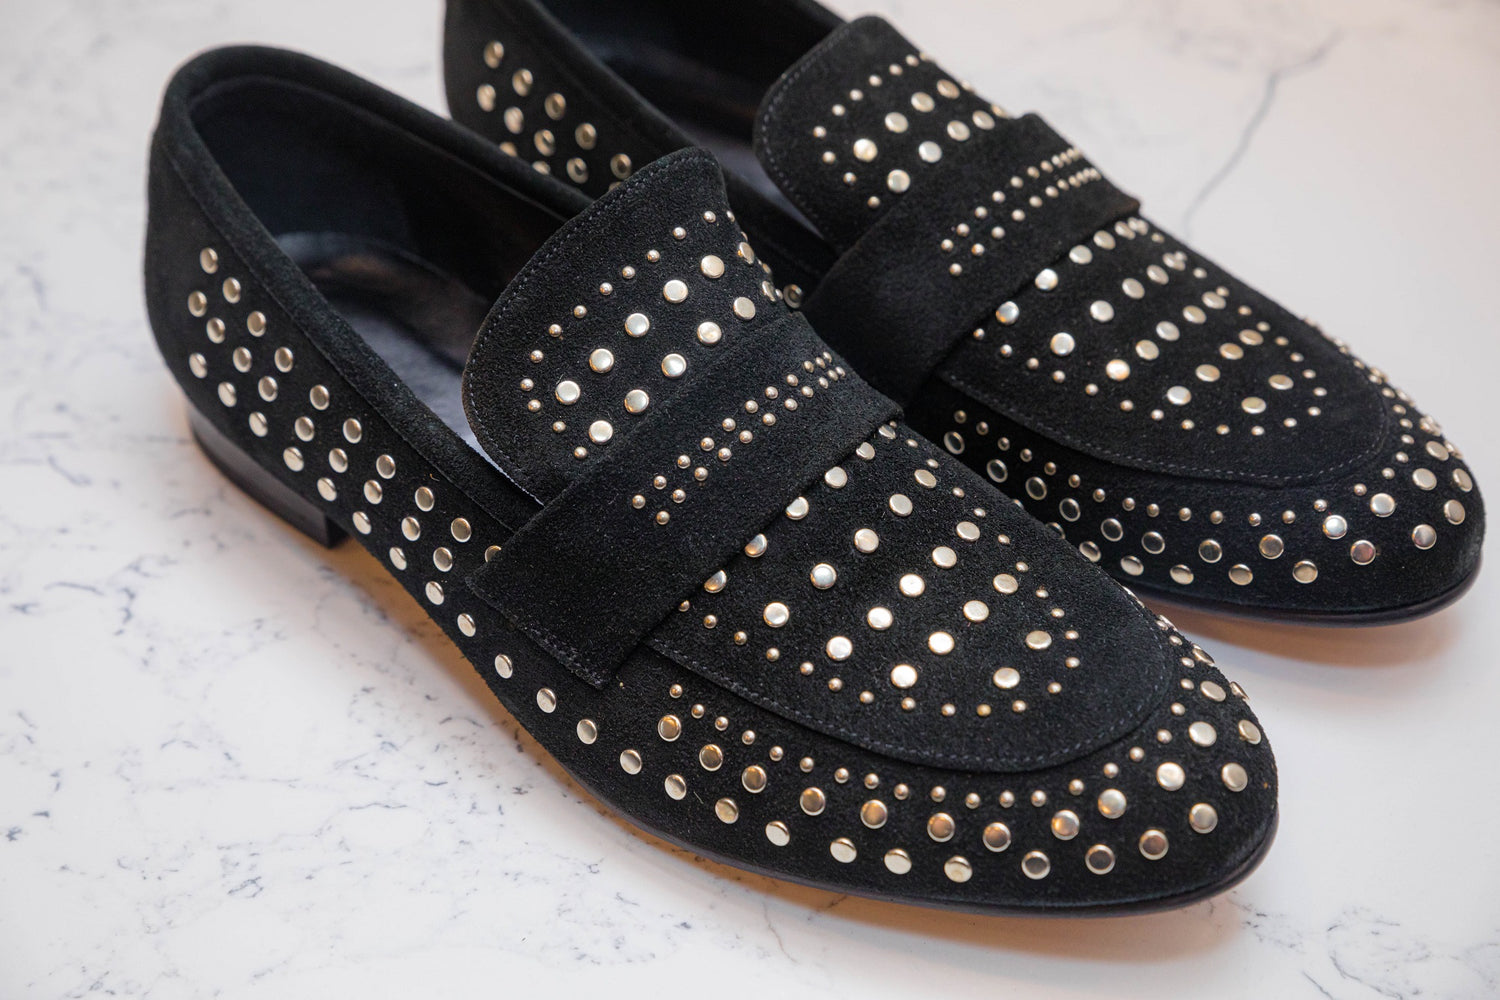 The Stud Loafers - Black - Loafers by Urbbana